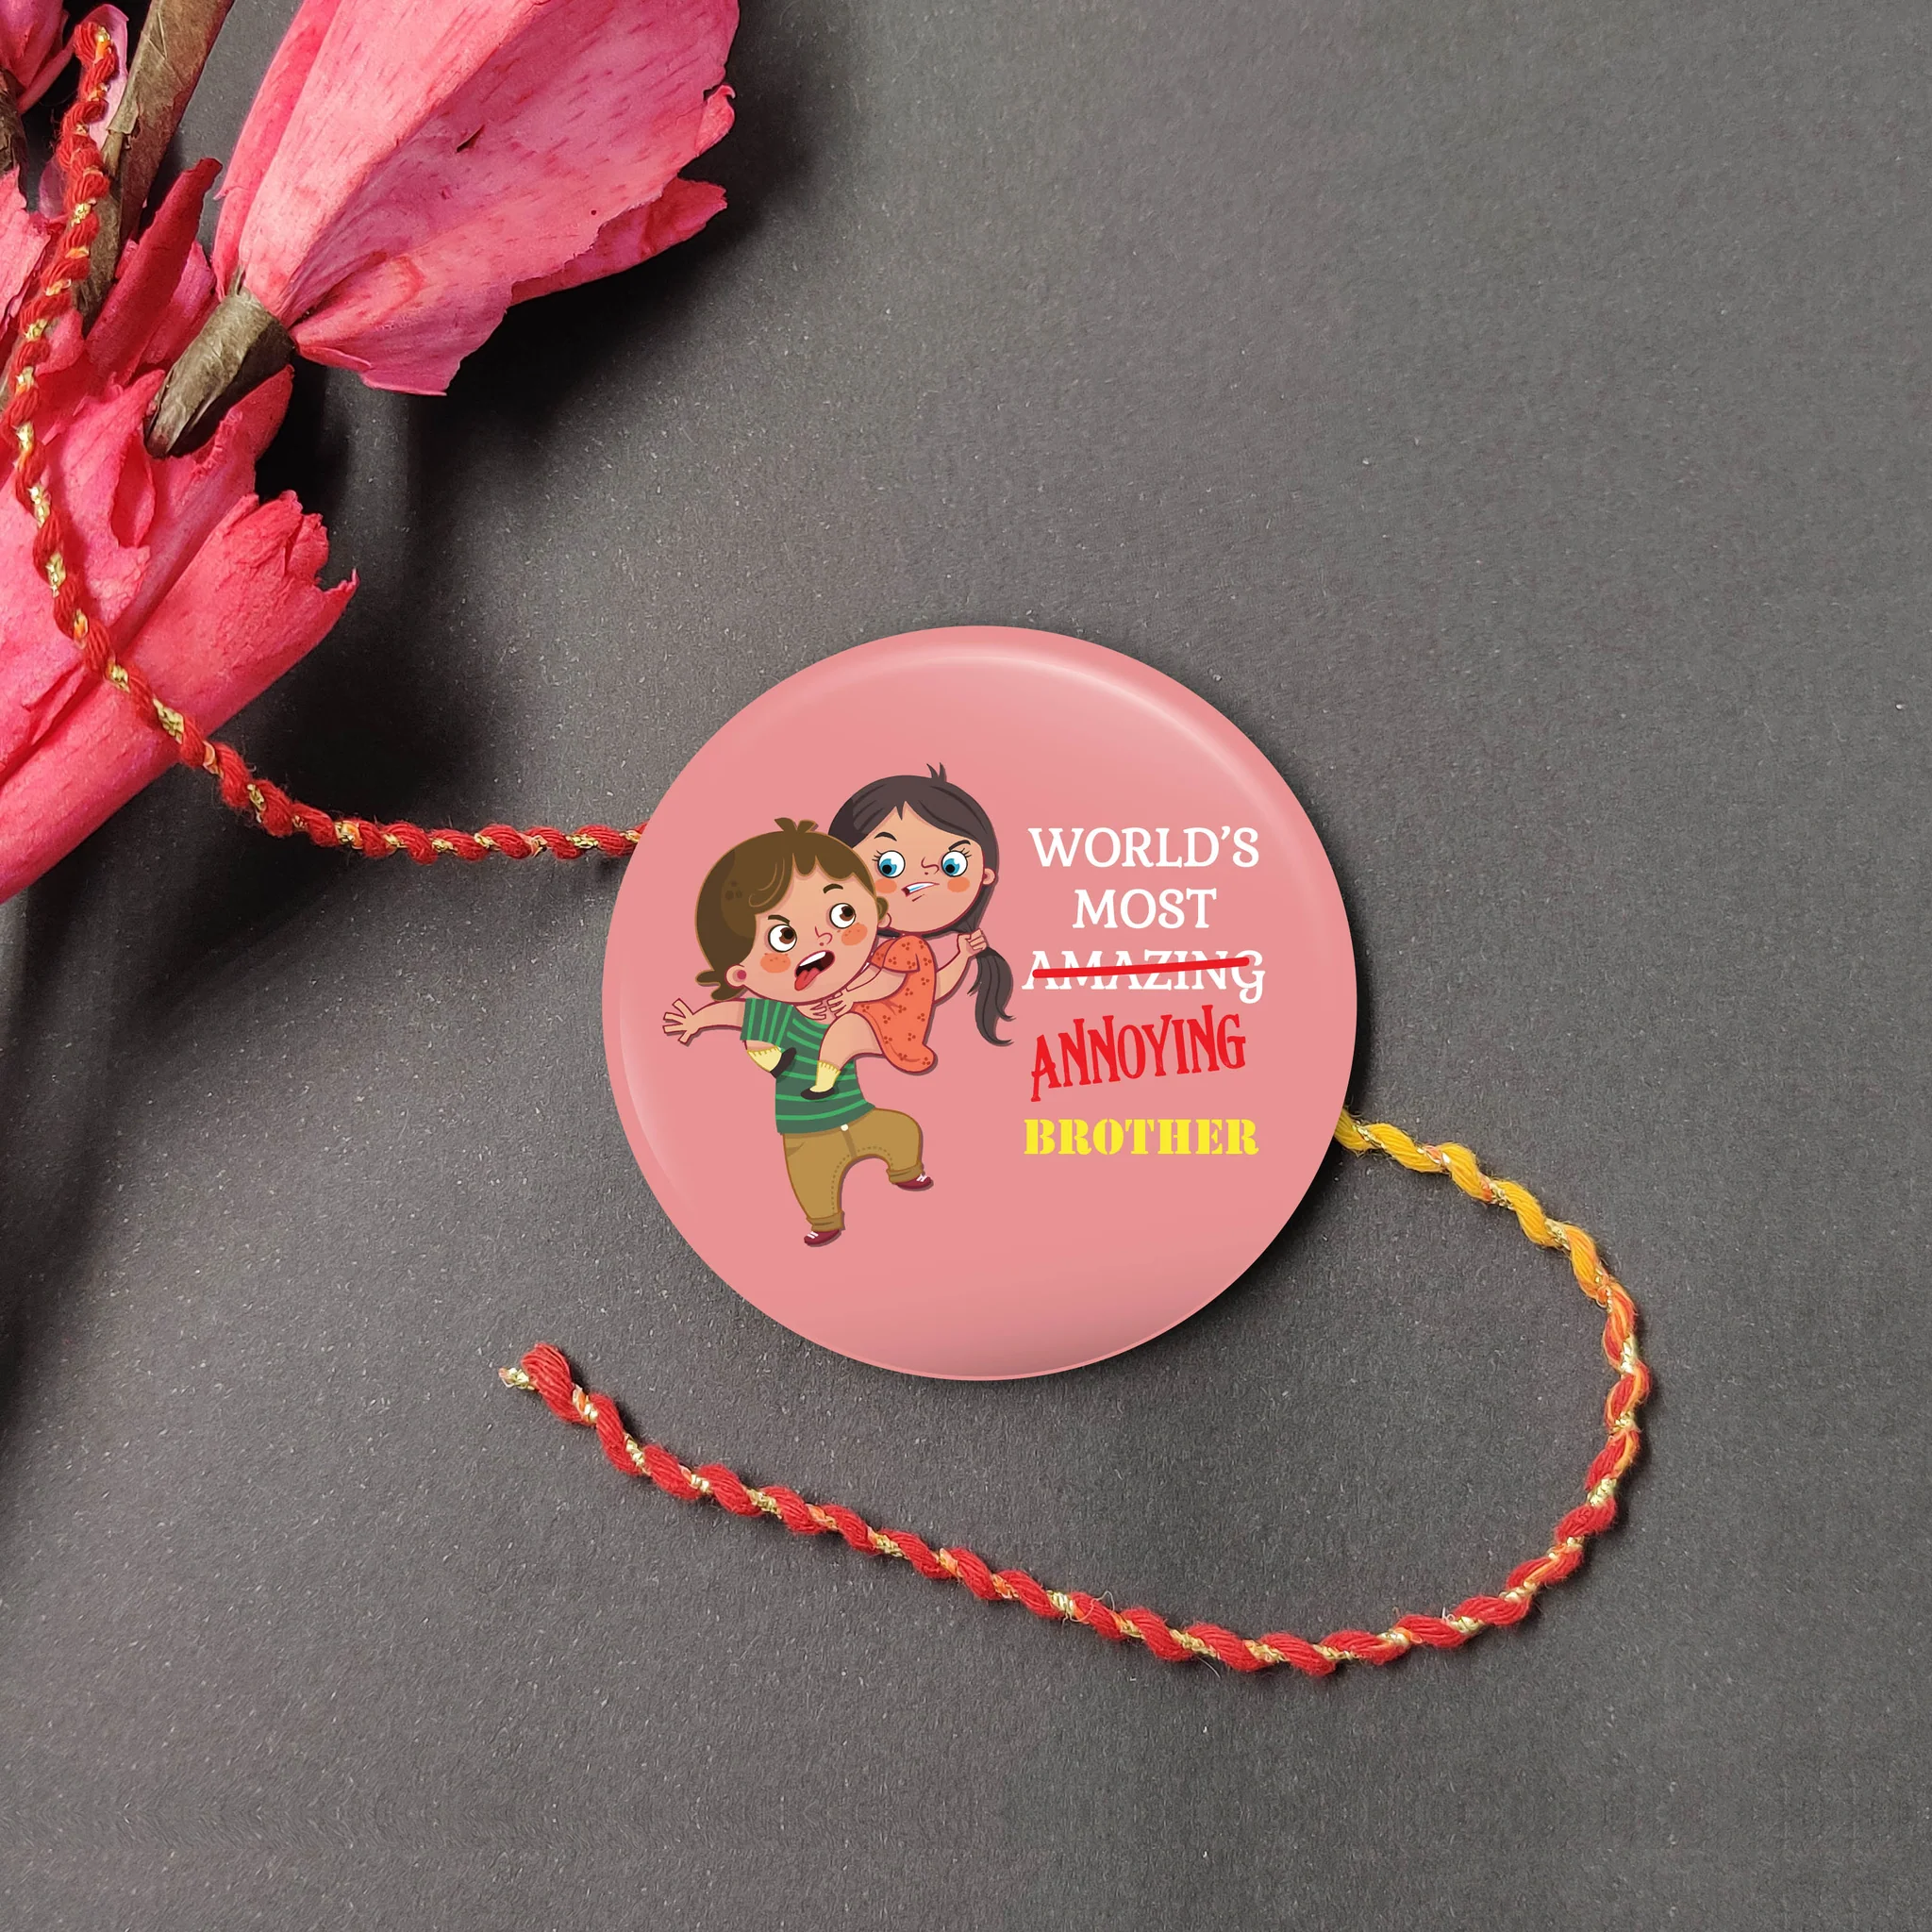 Annoying Brother Metal Rakhi with Fridge Magnet from Bhai Please